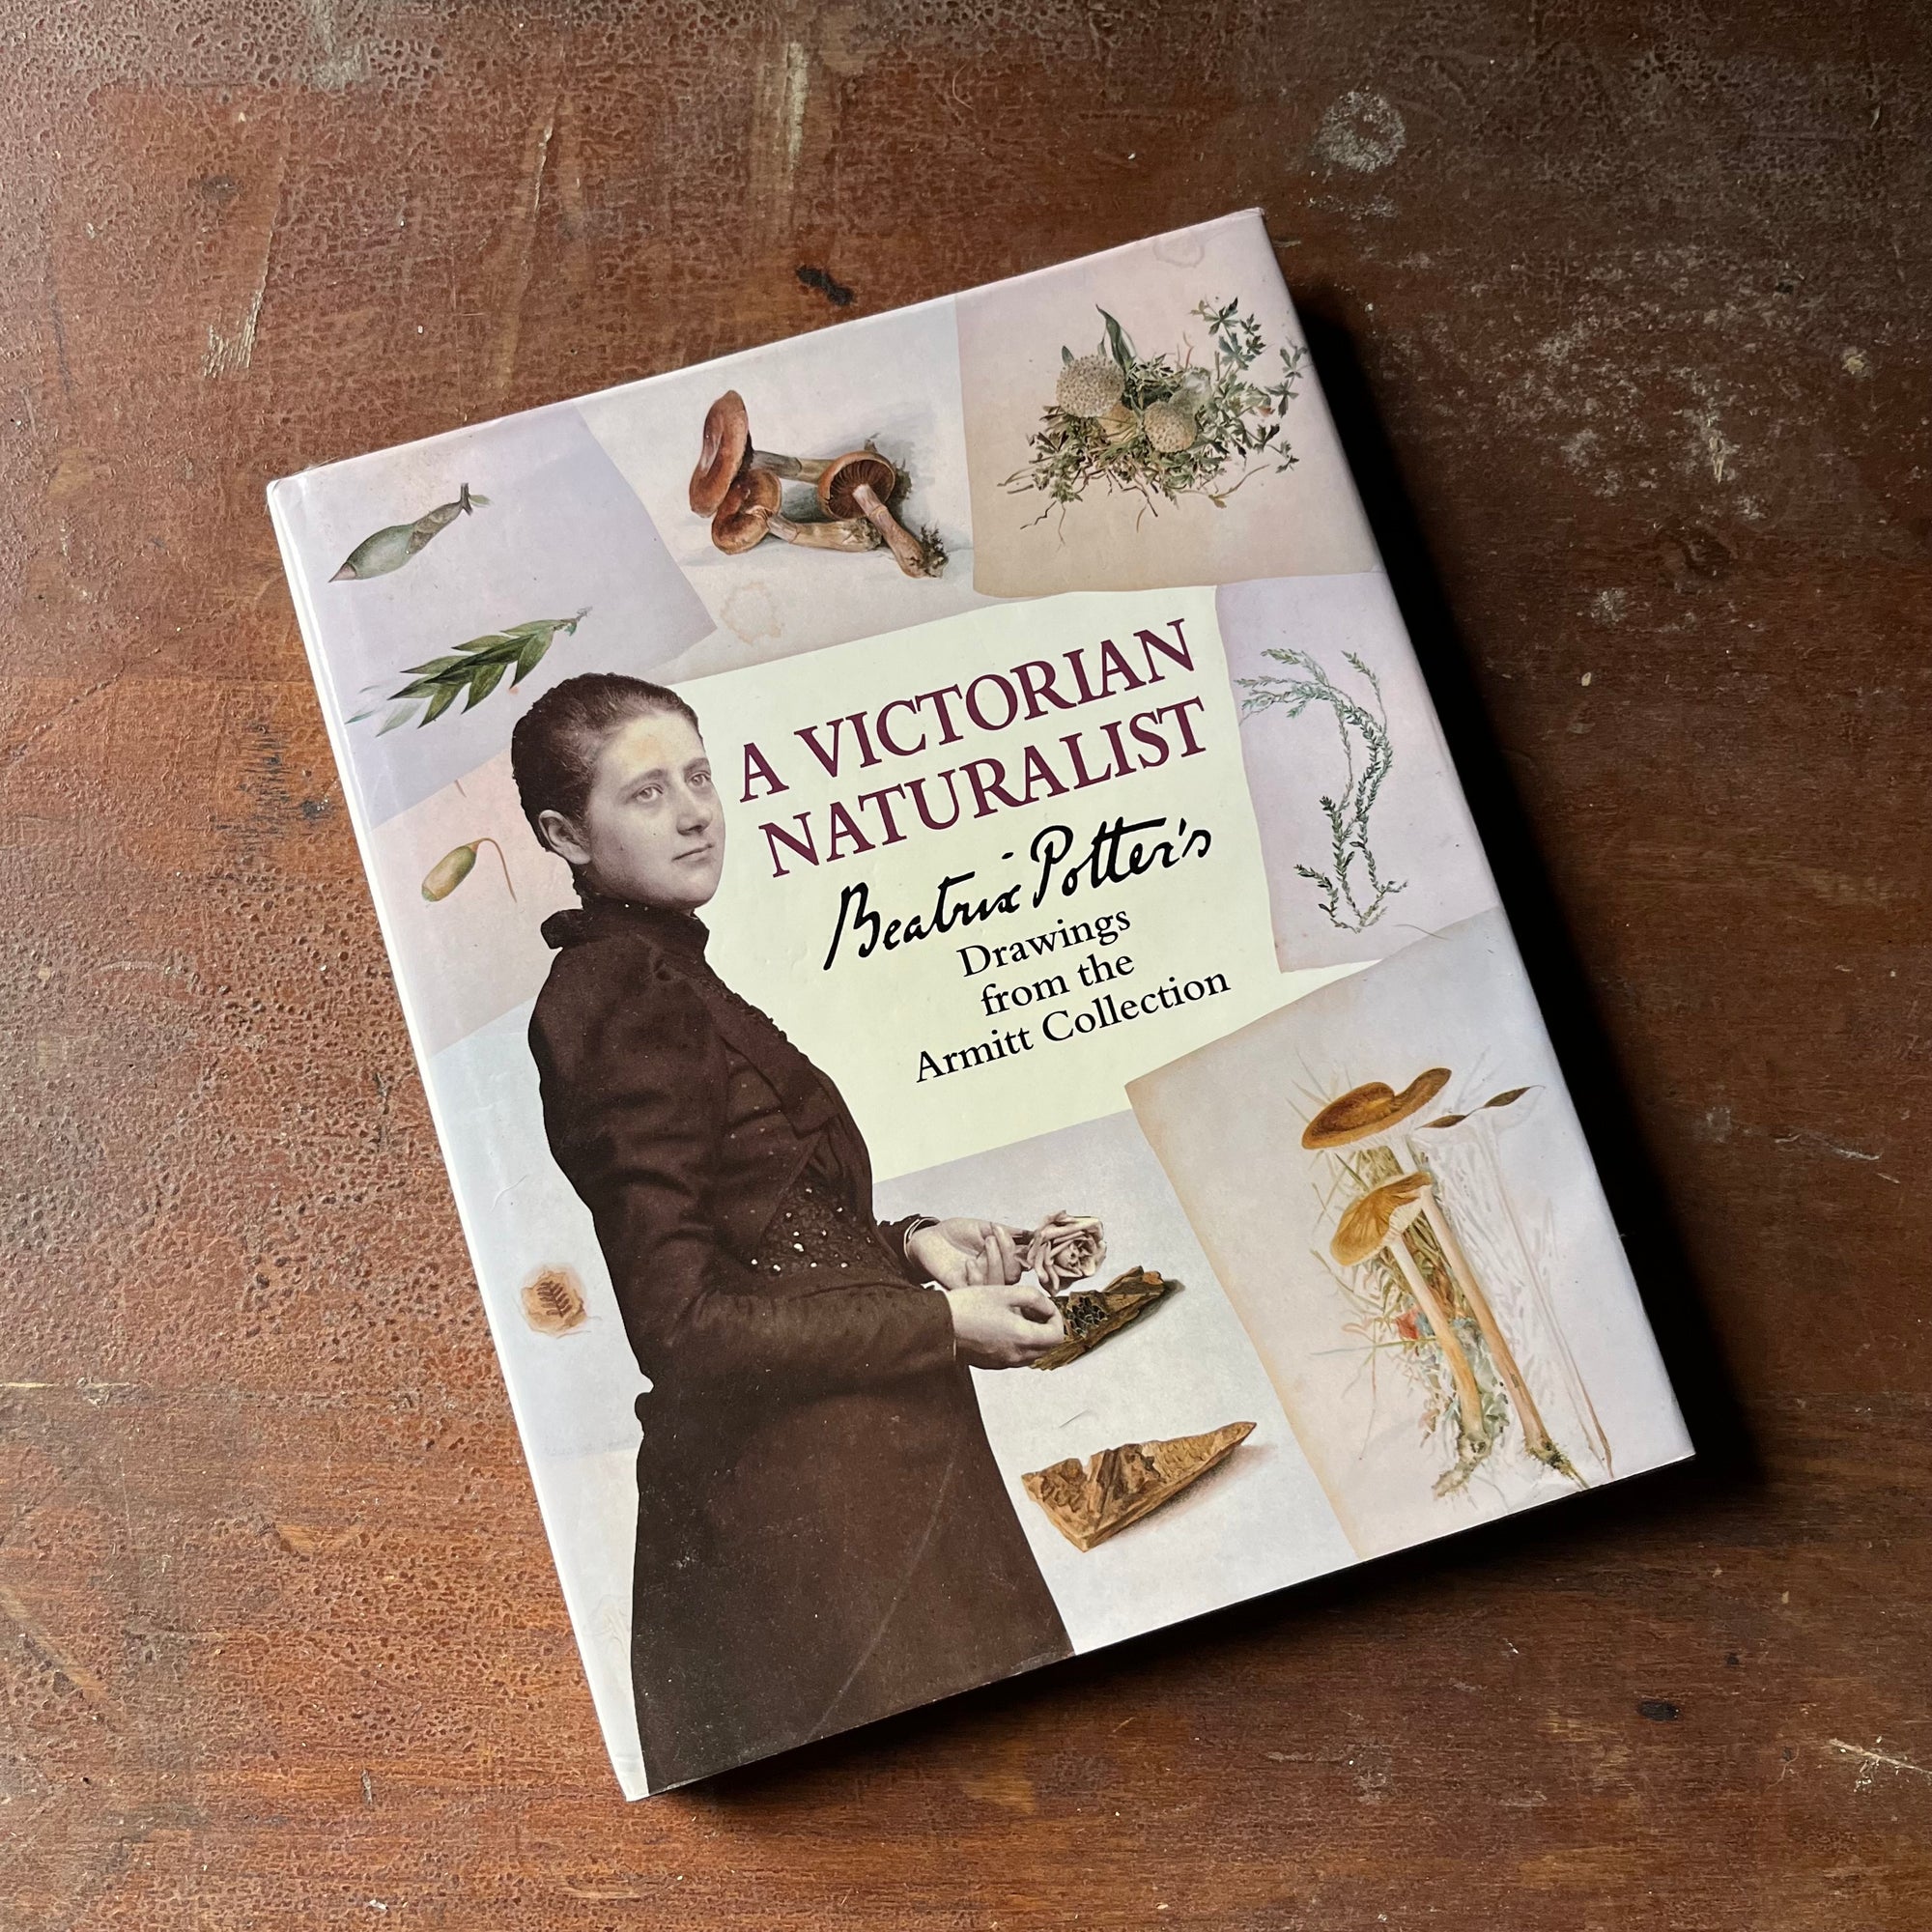 nature sketchbook, Victorian Era, Victorian England, Beatrix Potter Sketches - A Victorian Naturalist Beatrix Potter's Drawings from the Armitt Collection - view of the dust jacket's front cover with a photograph & sketches of Beatrix Potter